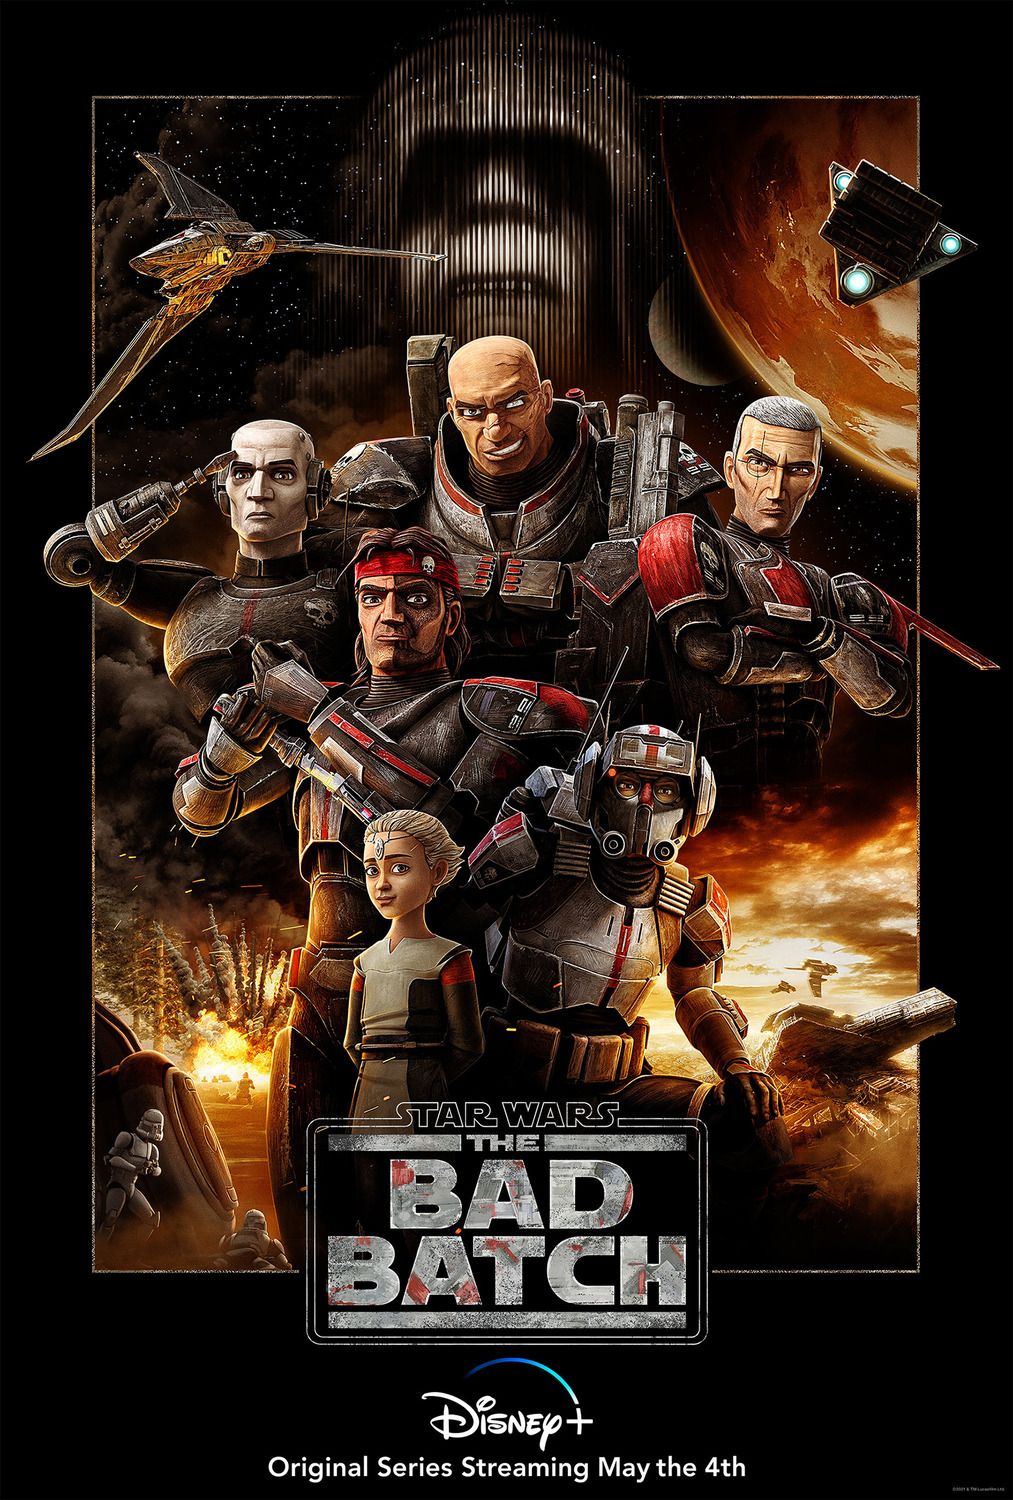 Star Wars The Bad Batch TV Show Poster